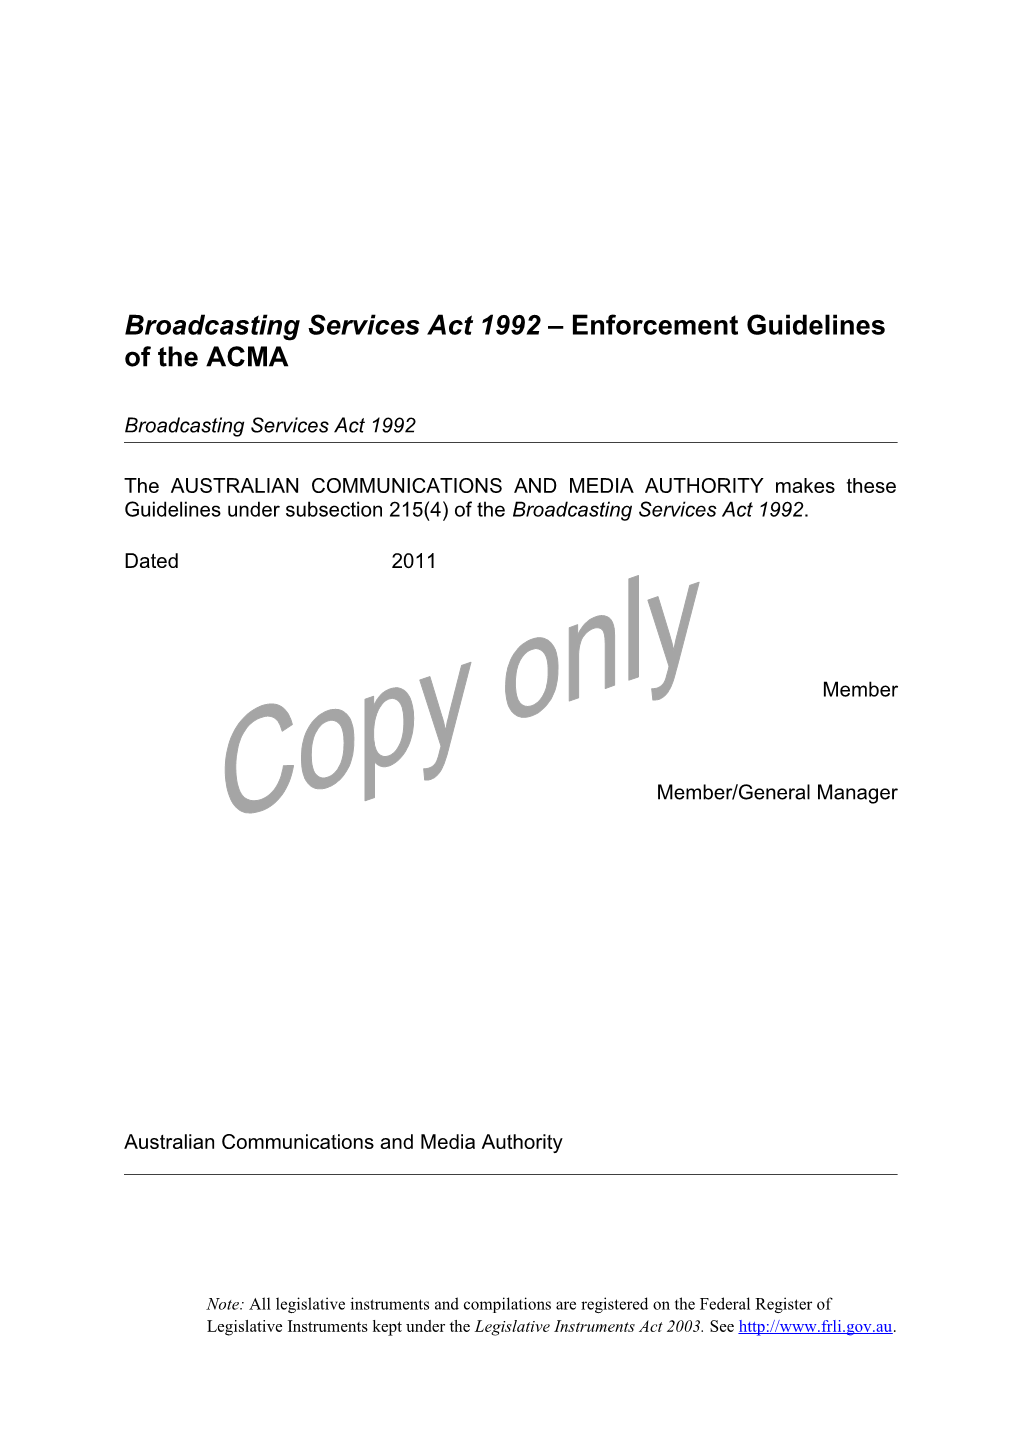 Broadcasting Services Act 1992 Enforcement Guidelines of the ACMA